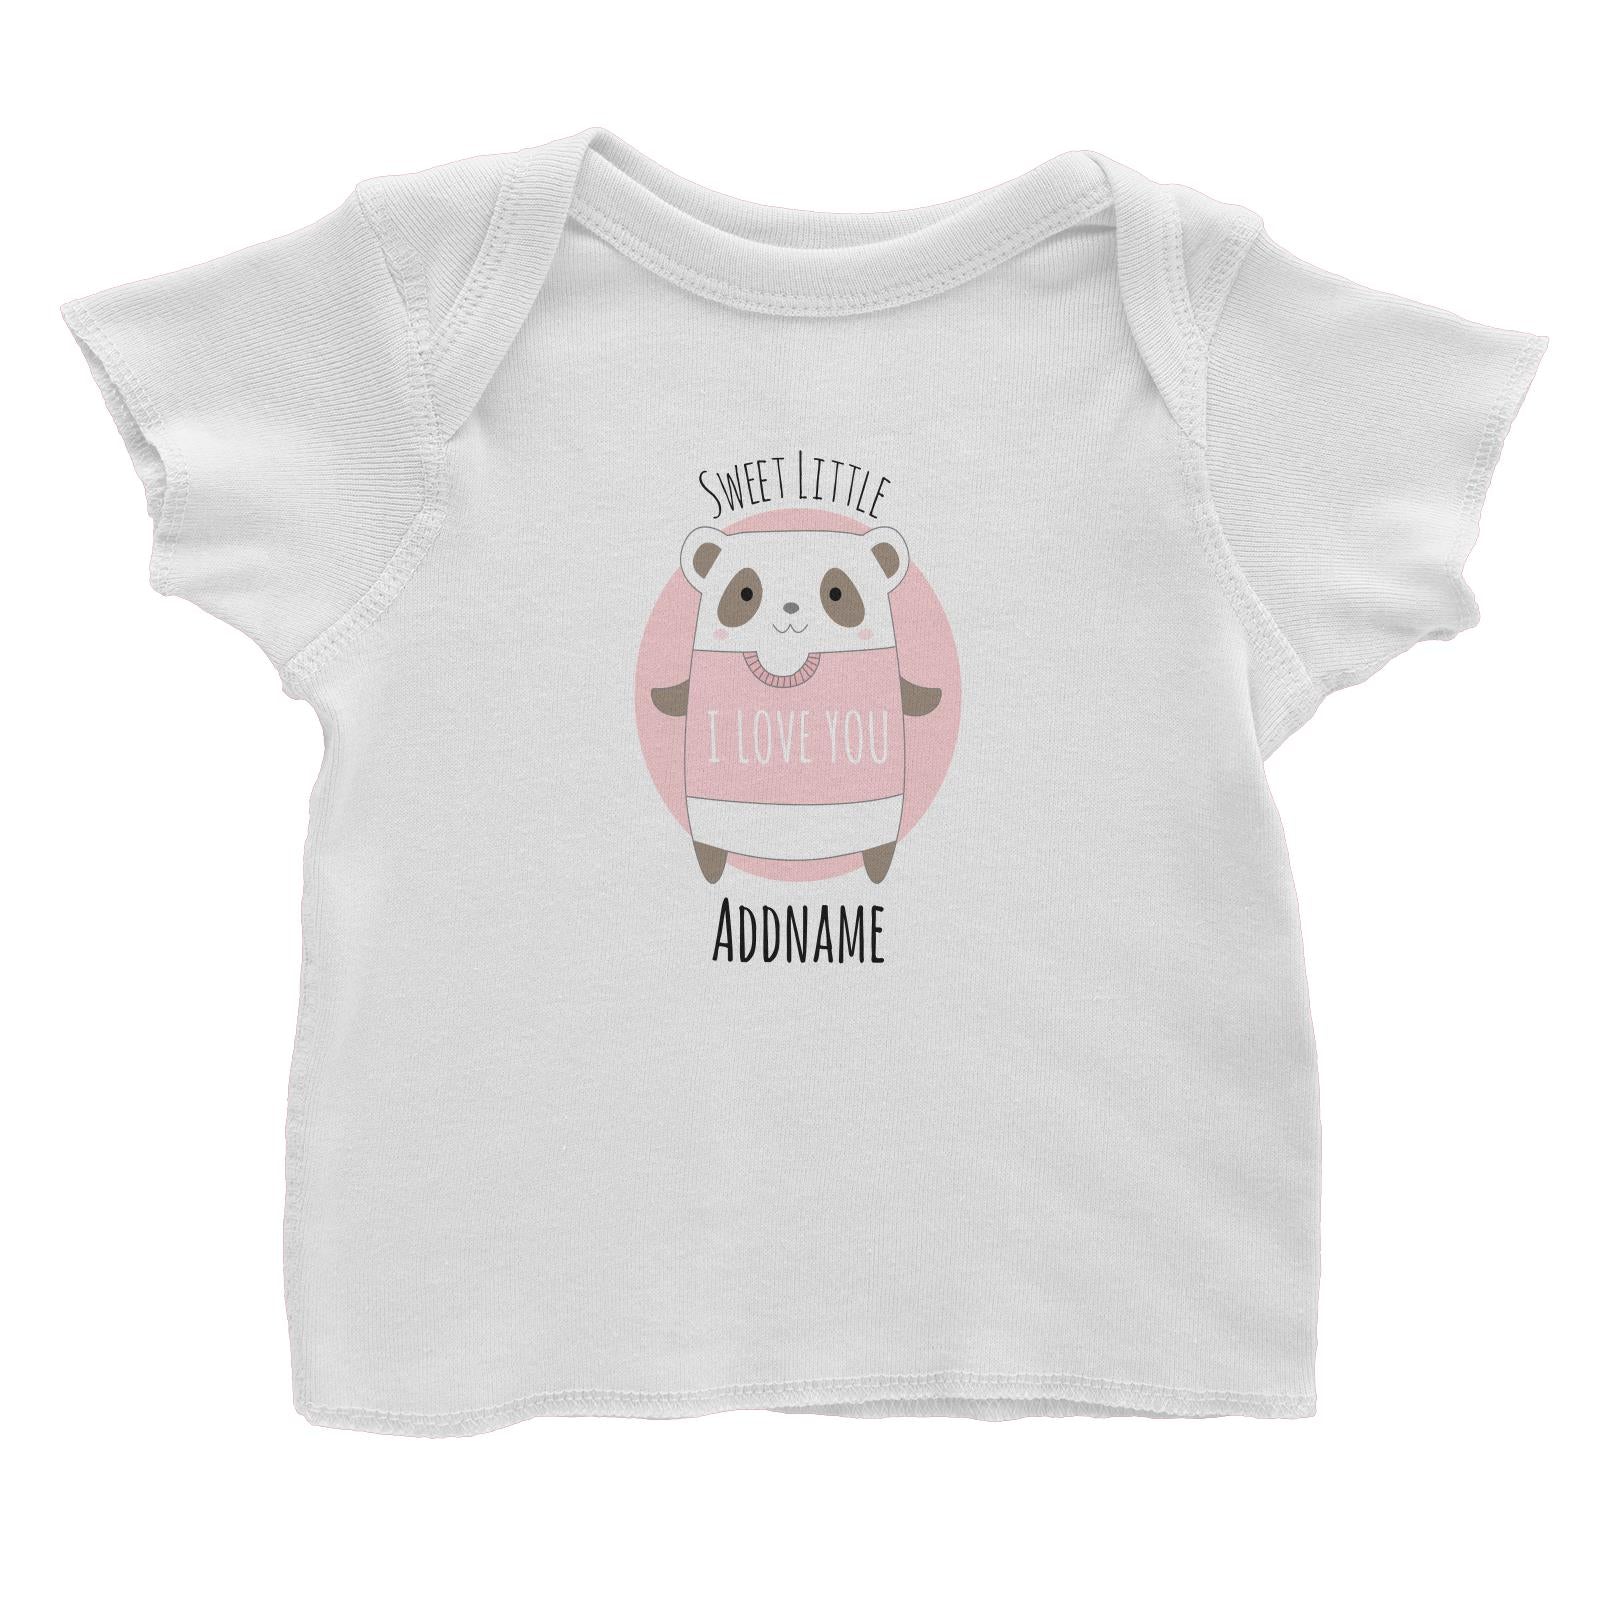 Sweet Animals Sketches Panda Sweet Little Addname Baby T-Shirt